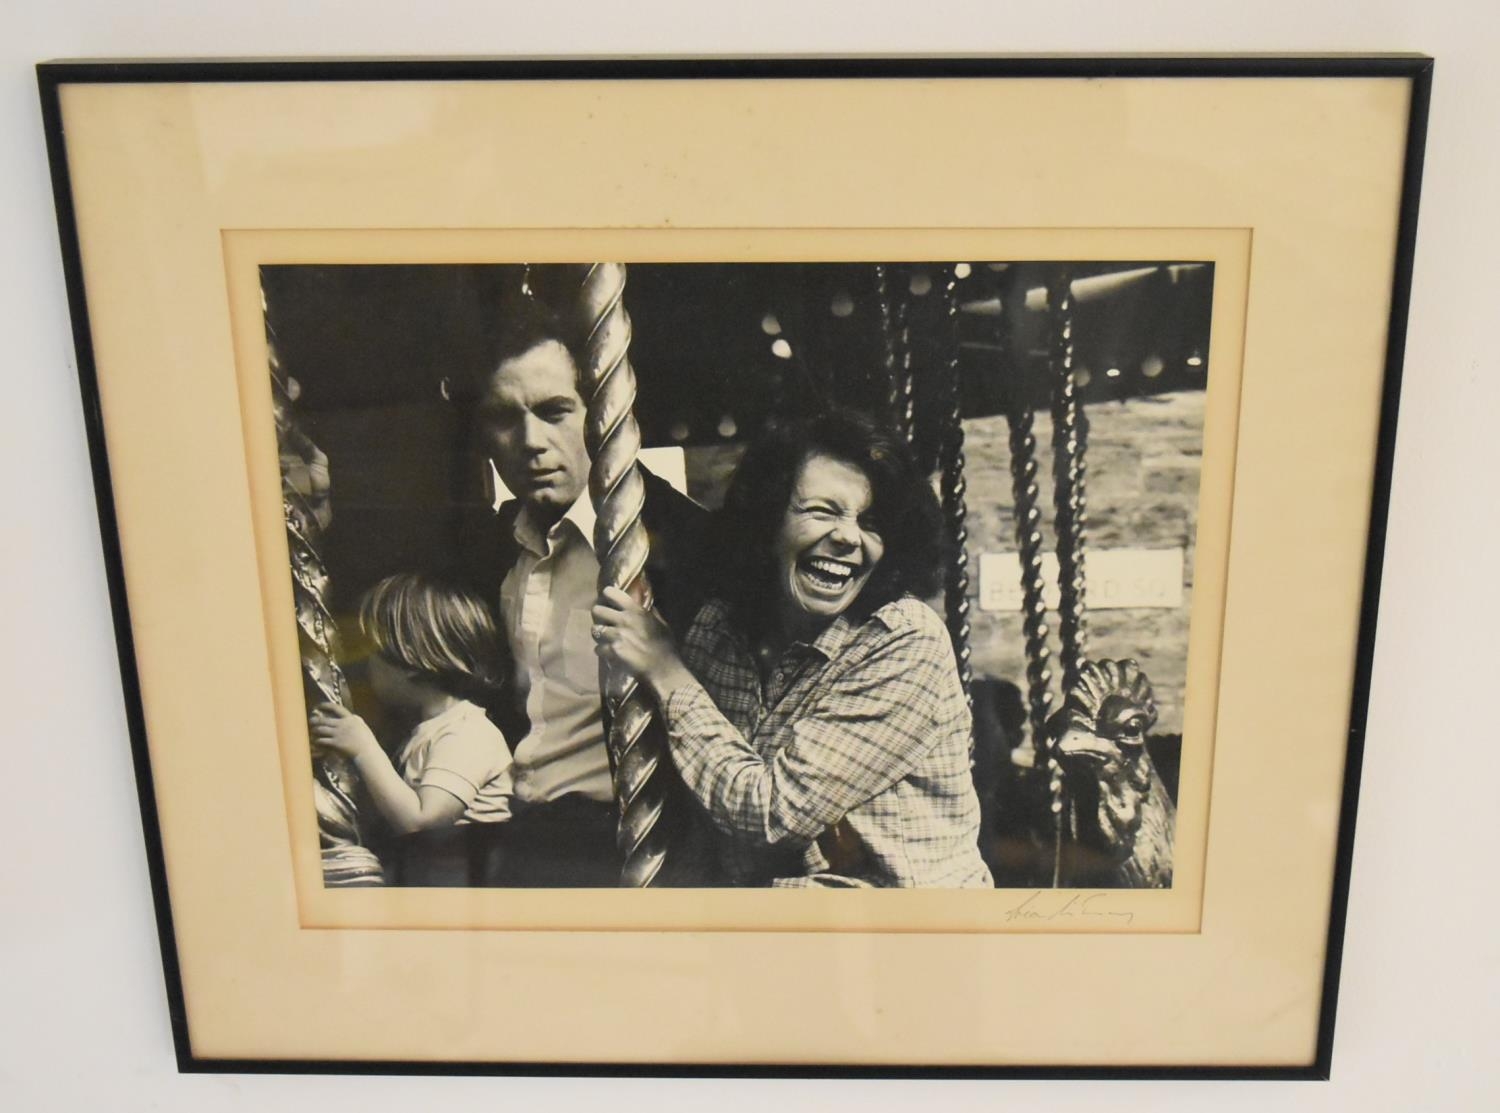 Indistinctly signed; Family at the Fair, a mounted black and white photograph, framed. H.46 W.54cm